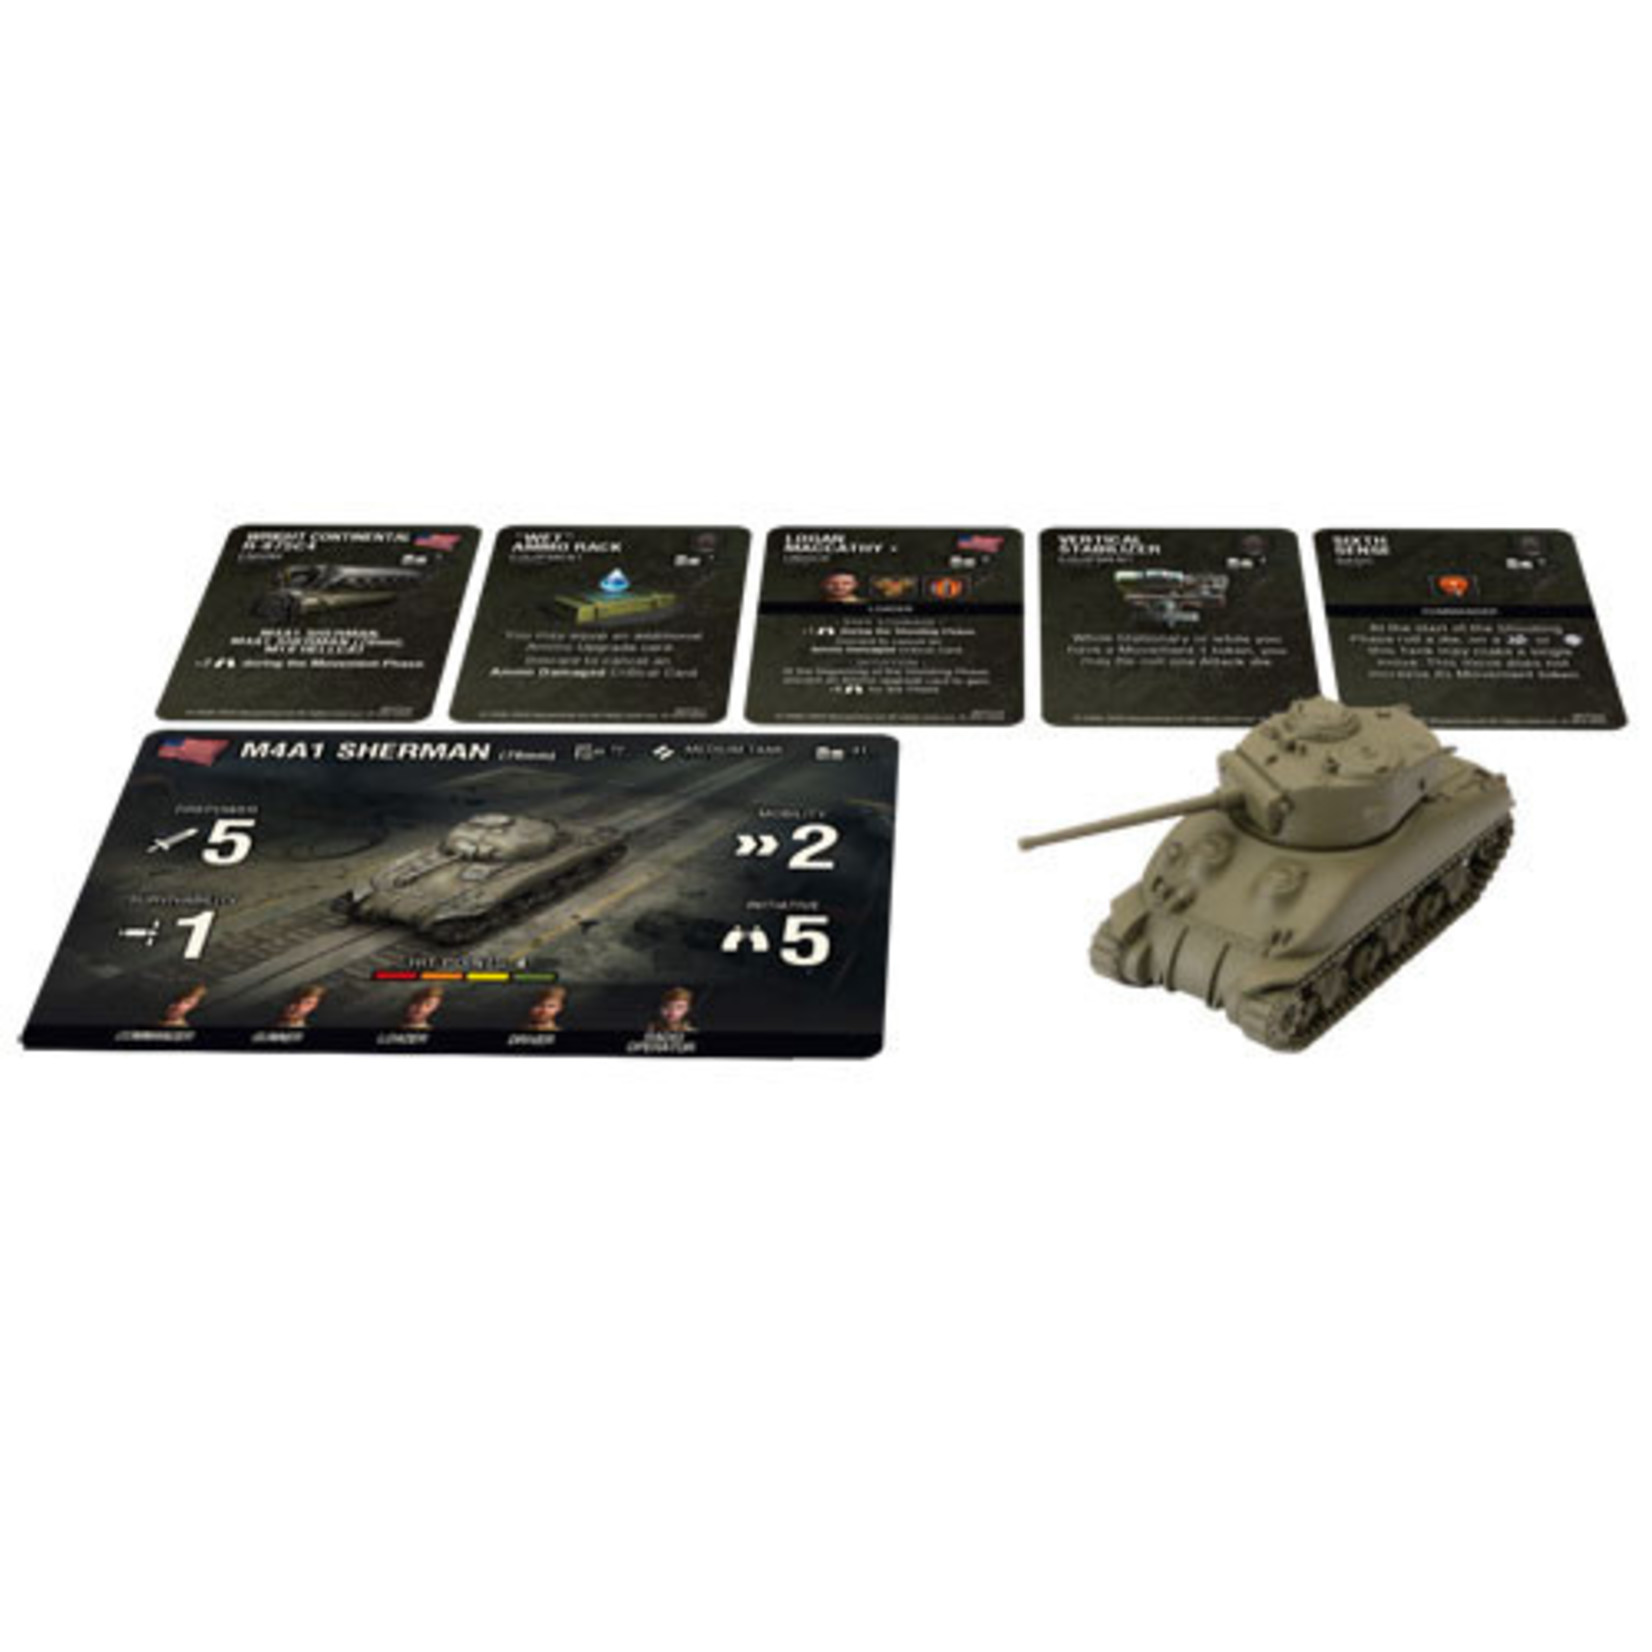 Gale Force 9 World of Tanks Expansion: American M4A1 76mm Sherman